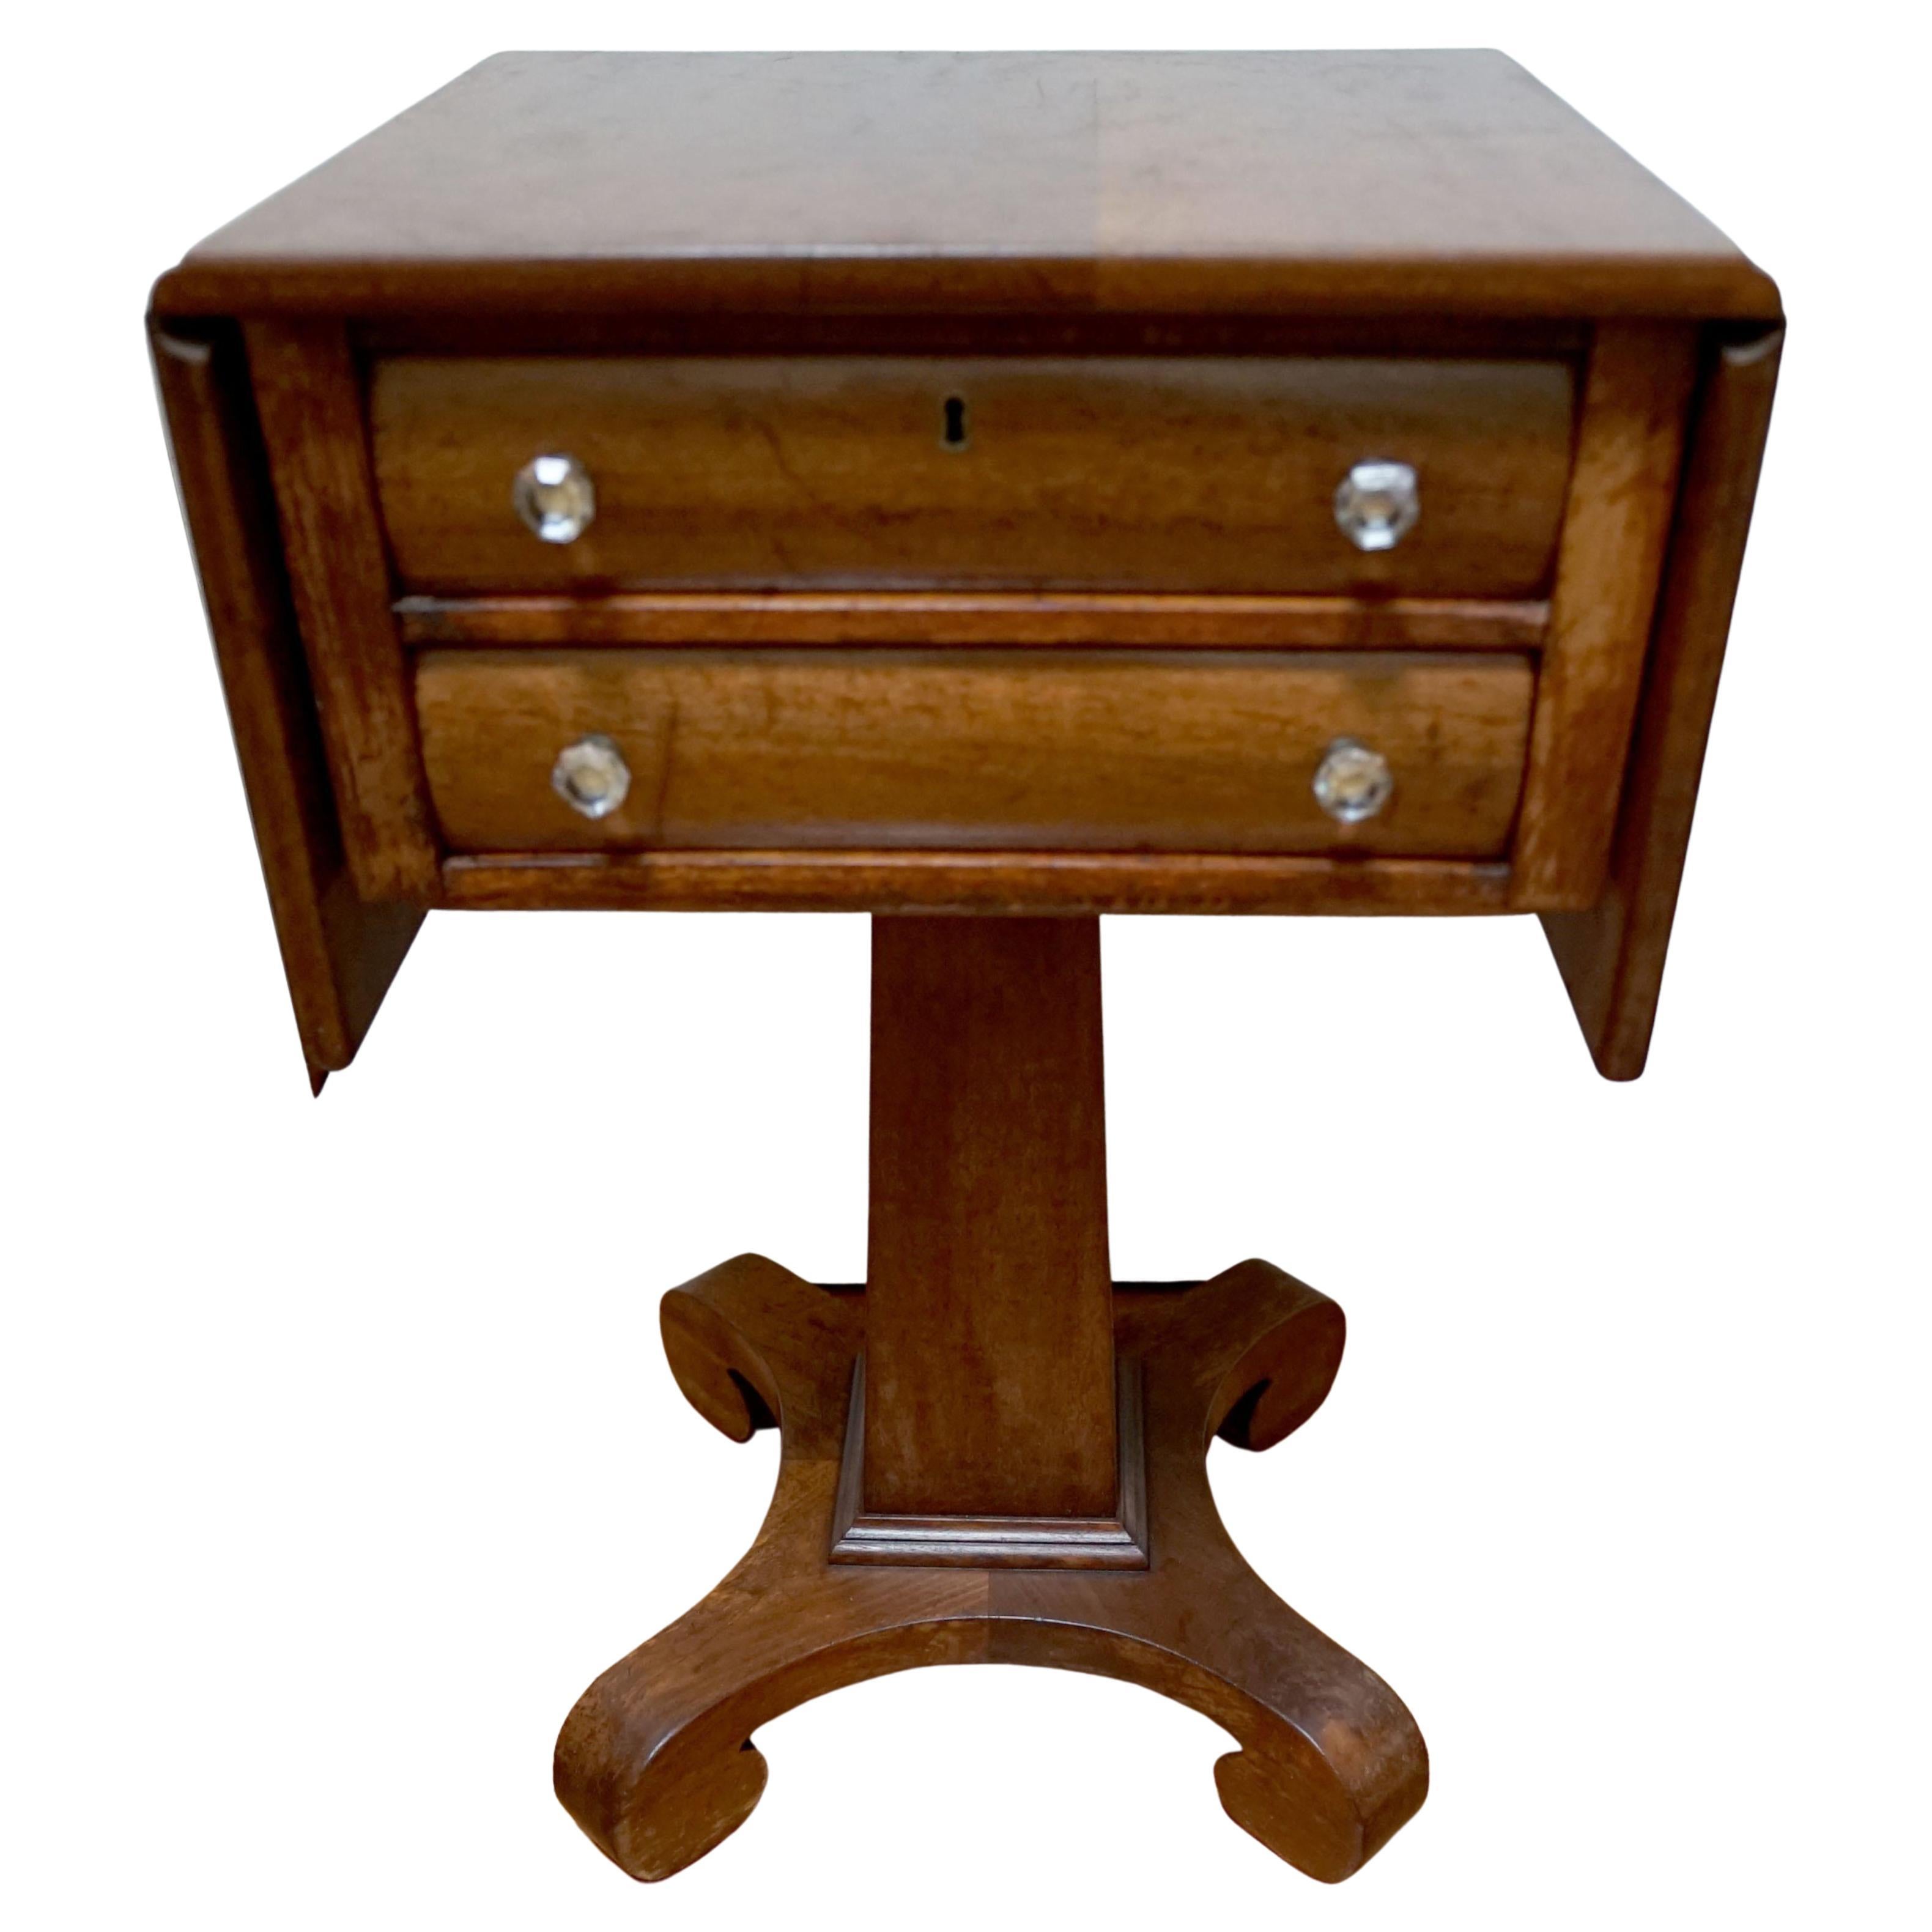 An American Empire mahogany drop-leaf worktable ready for light tasks or to function as a beautiful piece.
Appraisers say it was probably produced in New York from 1825 to 1835. Designers will love deciding how to pair this vintage item with more